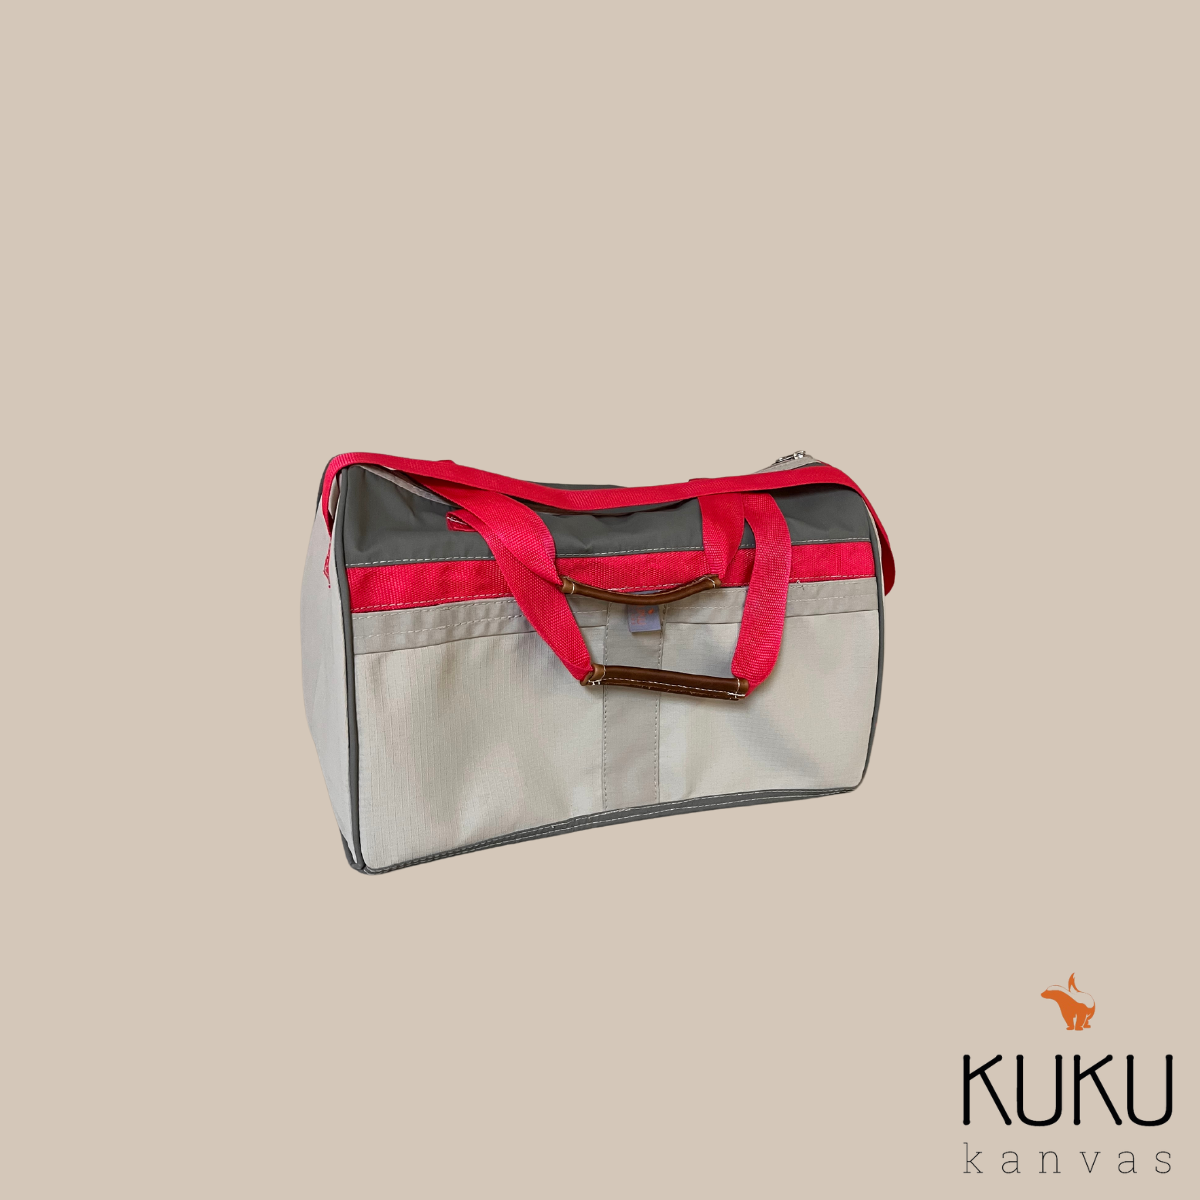 A white bag with a red handle is on a beige background.